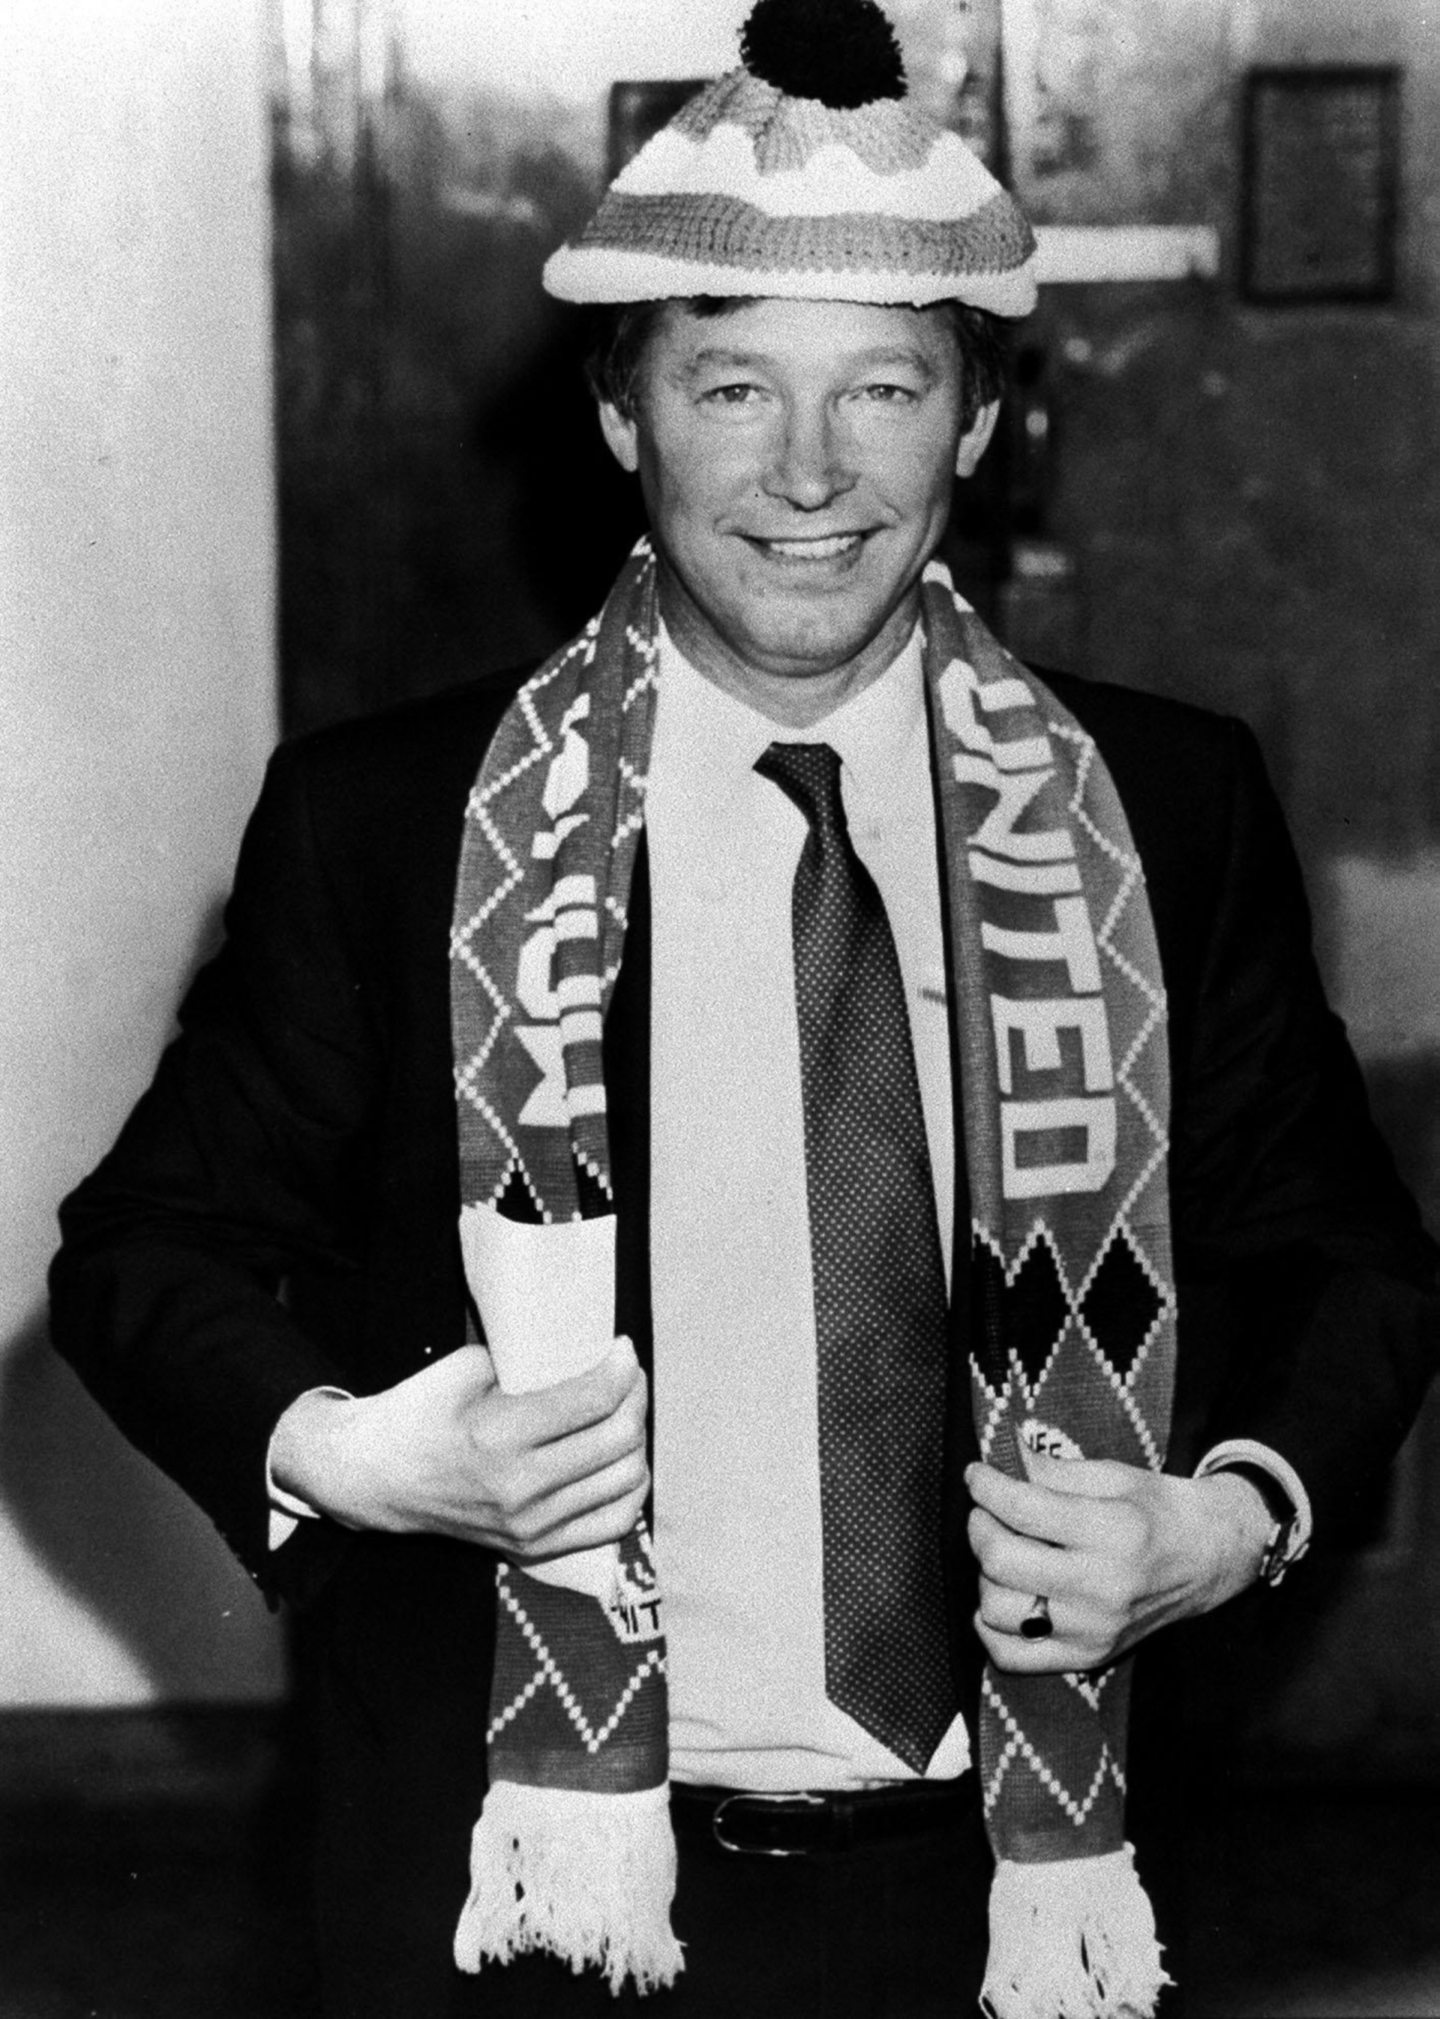 New manager Alex Ferguson is paraded at a press conference at Old Trafford on November 7 1986.